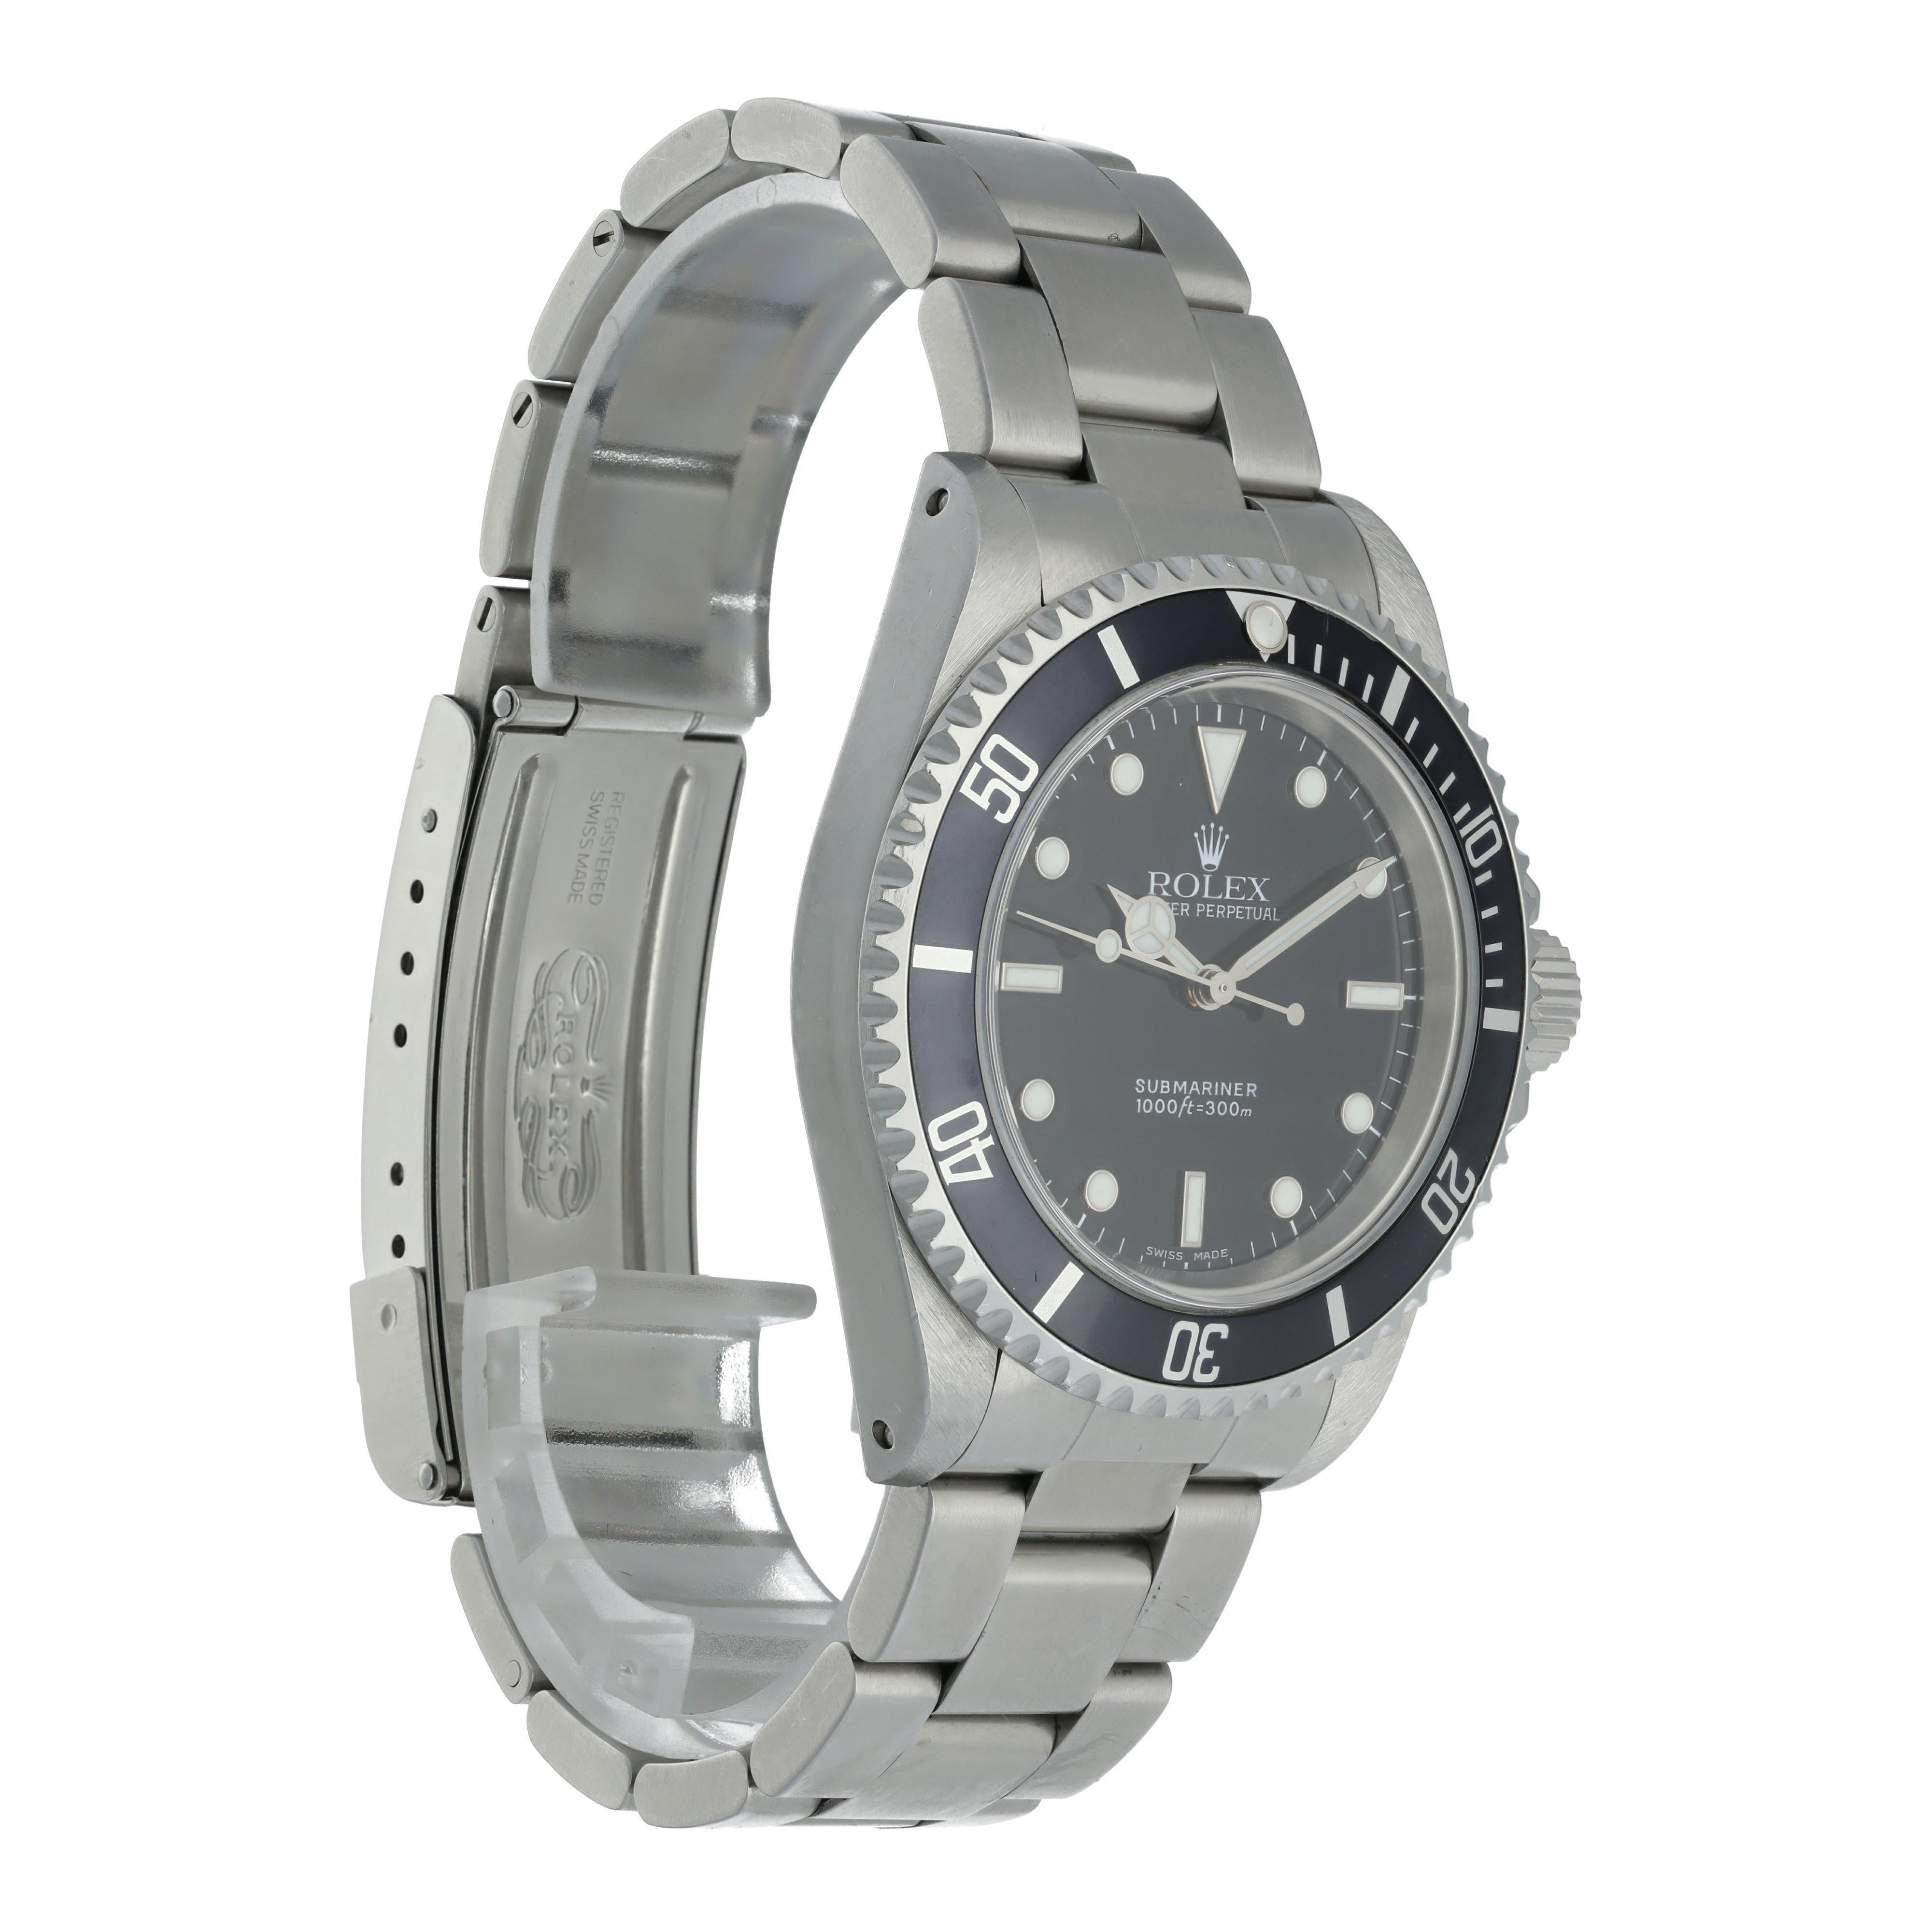 Rolex Submariner 16610 Men’s Watch In Excellent Condition For Sale In New York, NY